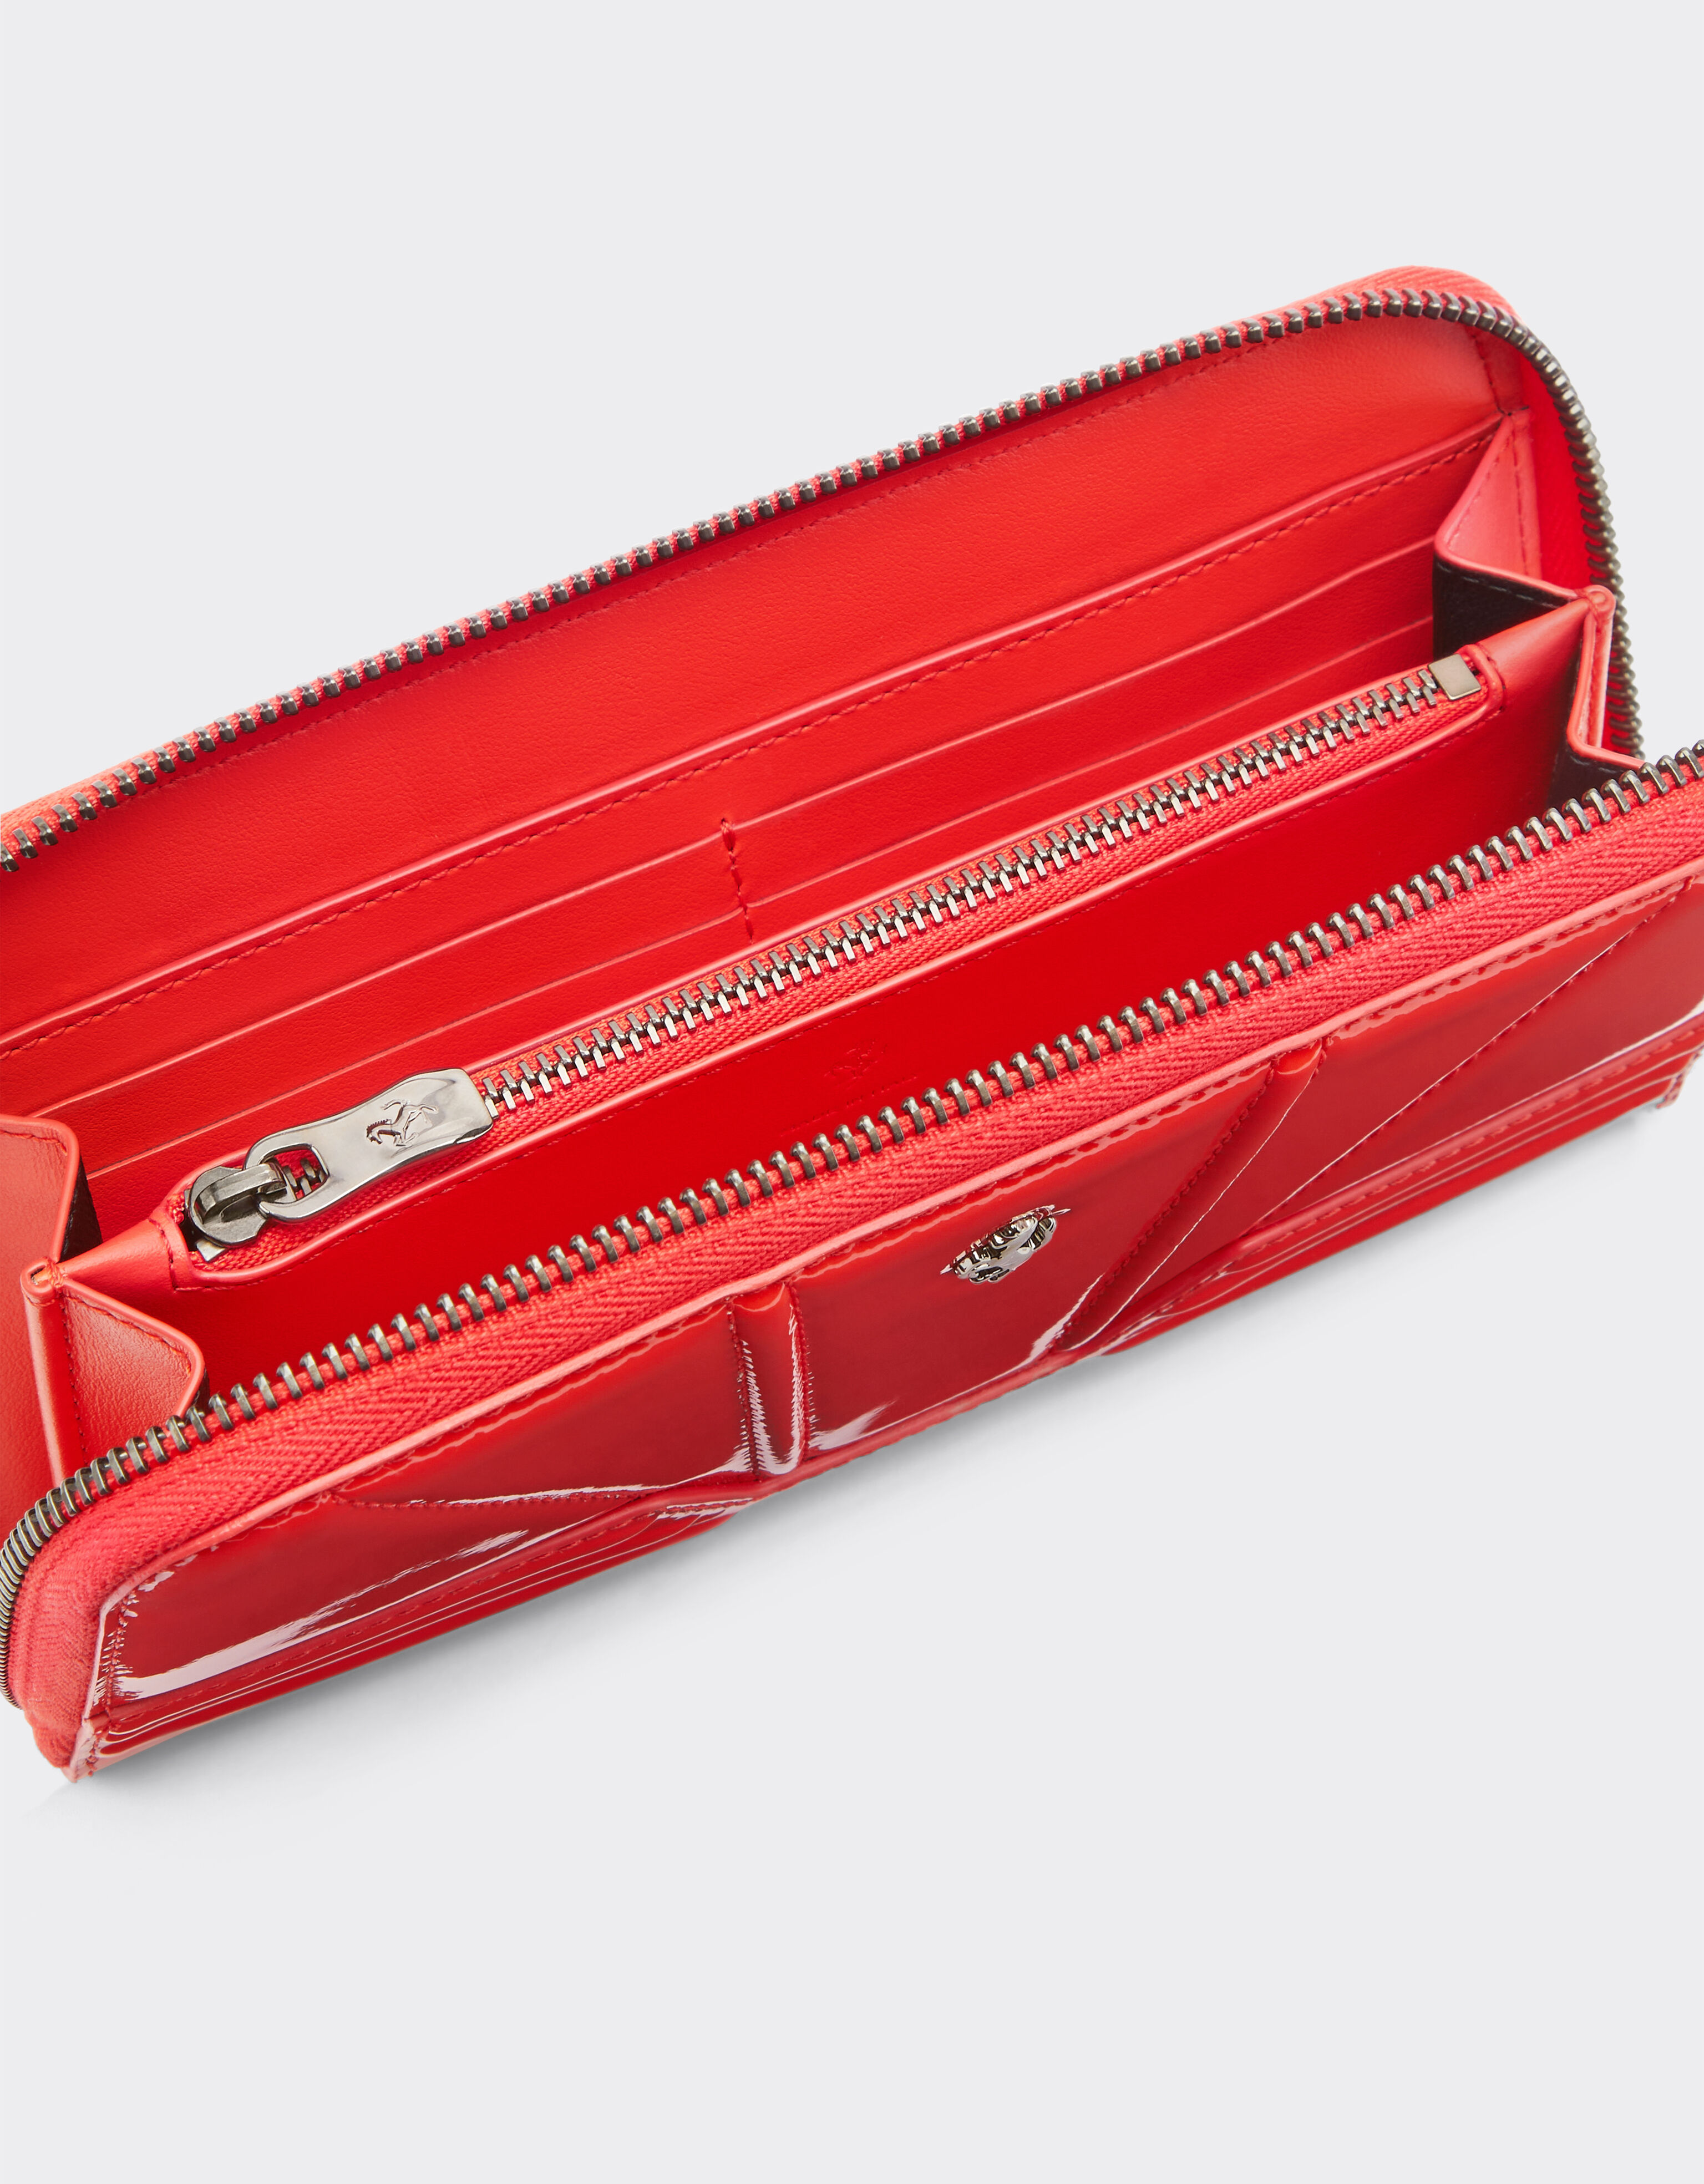 Ferrari Patent leather wallet with zip Rosso Dino 20242f